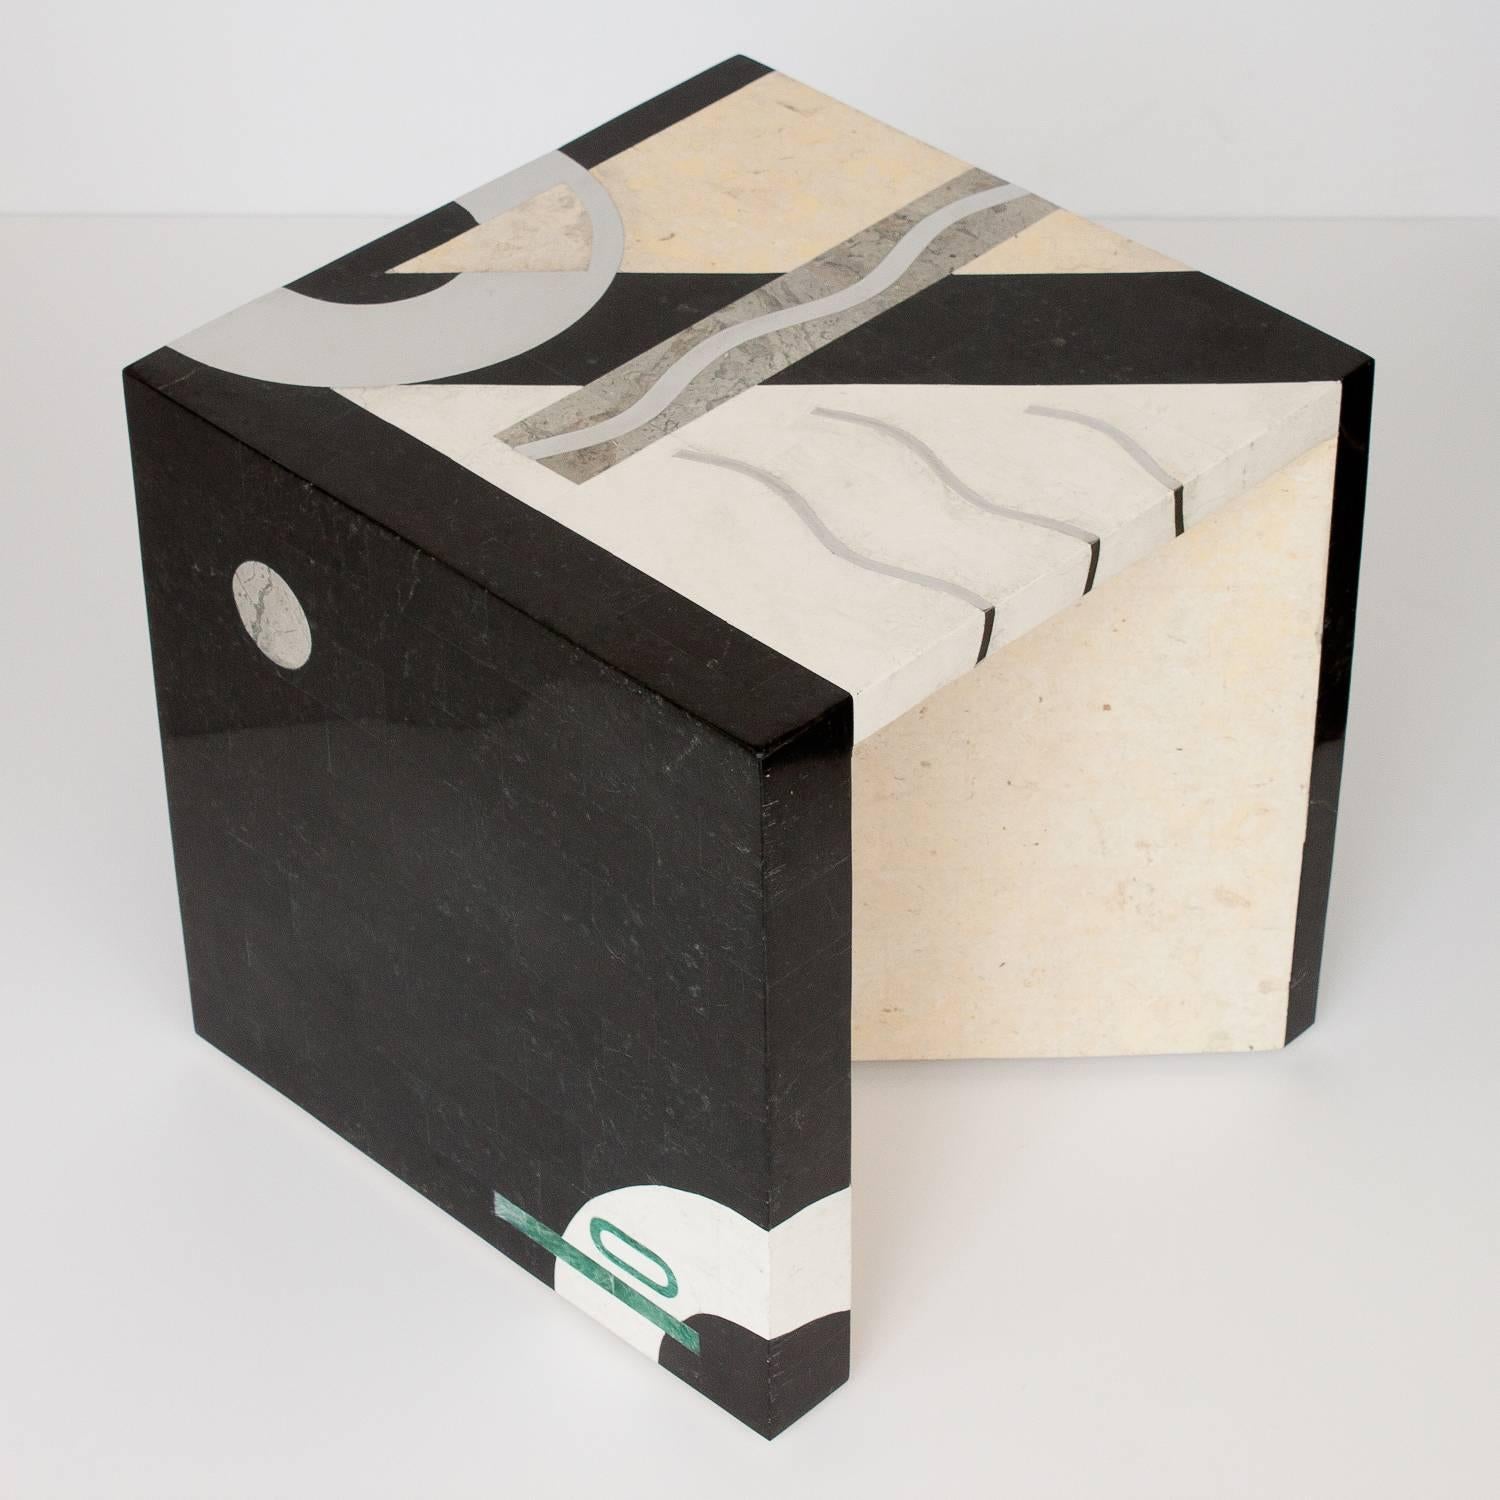 Striking modern Italian tessellated marble side or end table by Oggetti. Geometric abstract design. Sculptural form with unexpected diagonal leg opening the cube on two sides. Stone veneer in black, off-white, cream, gray and a touch of green.